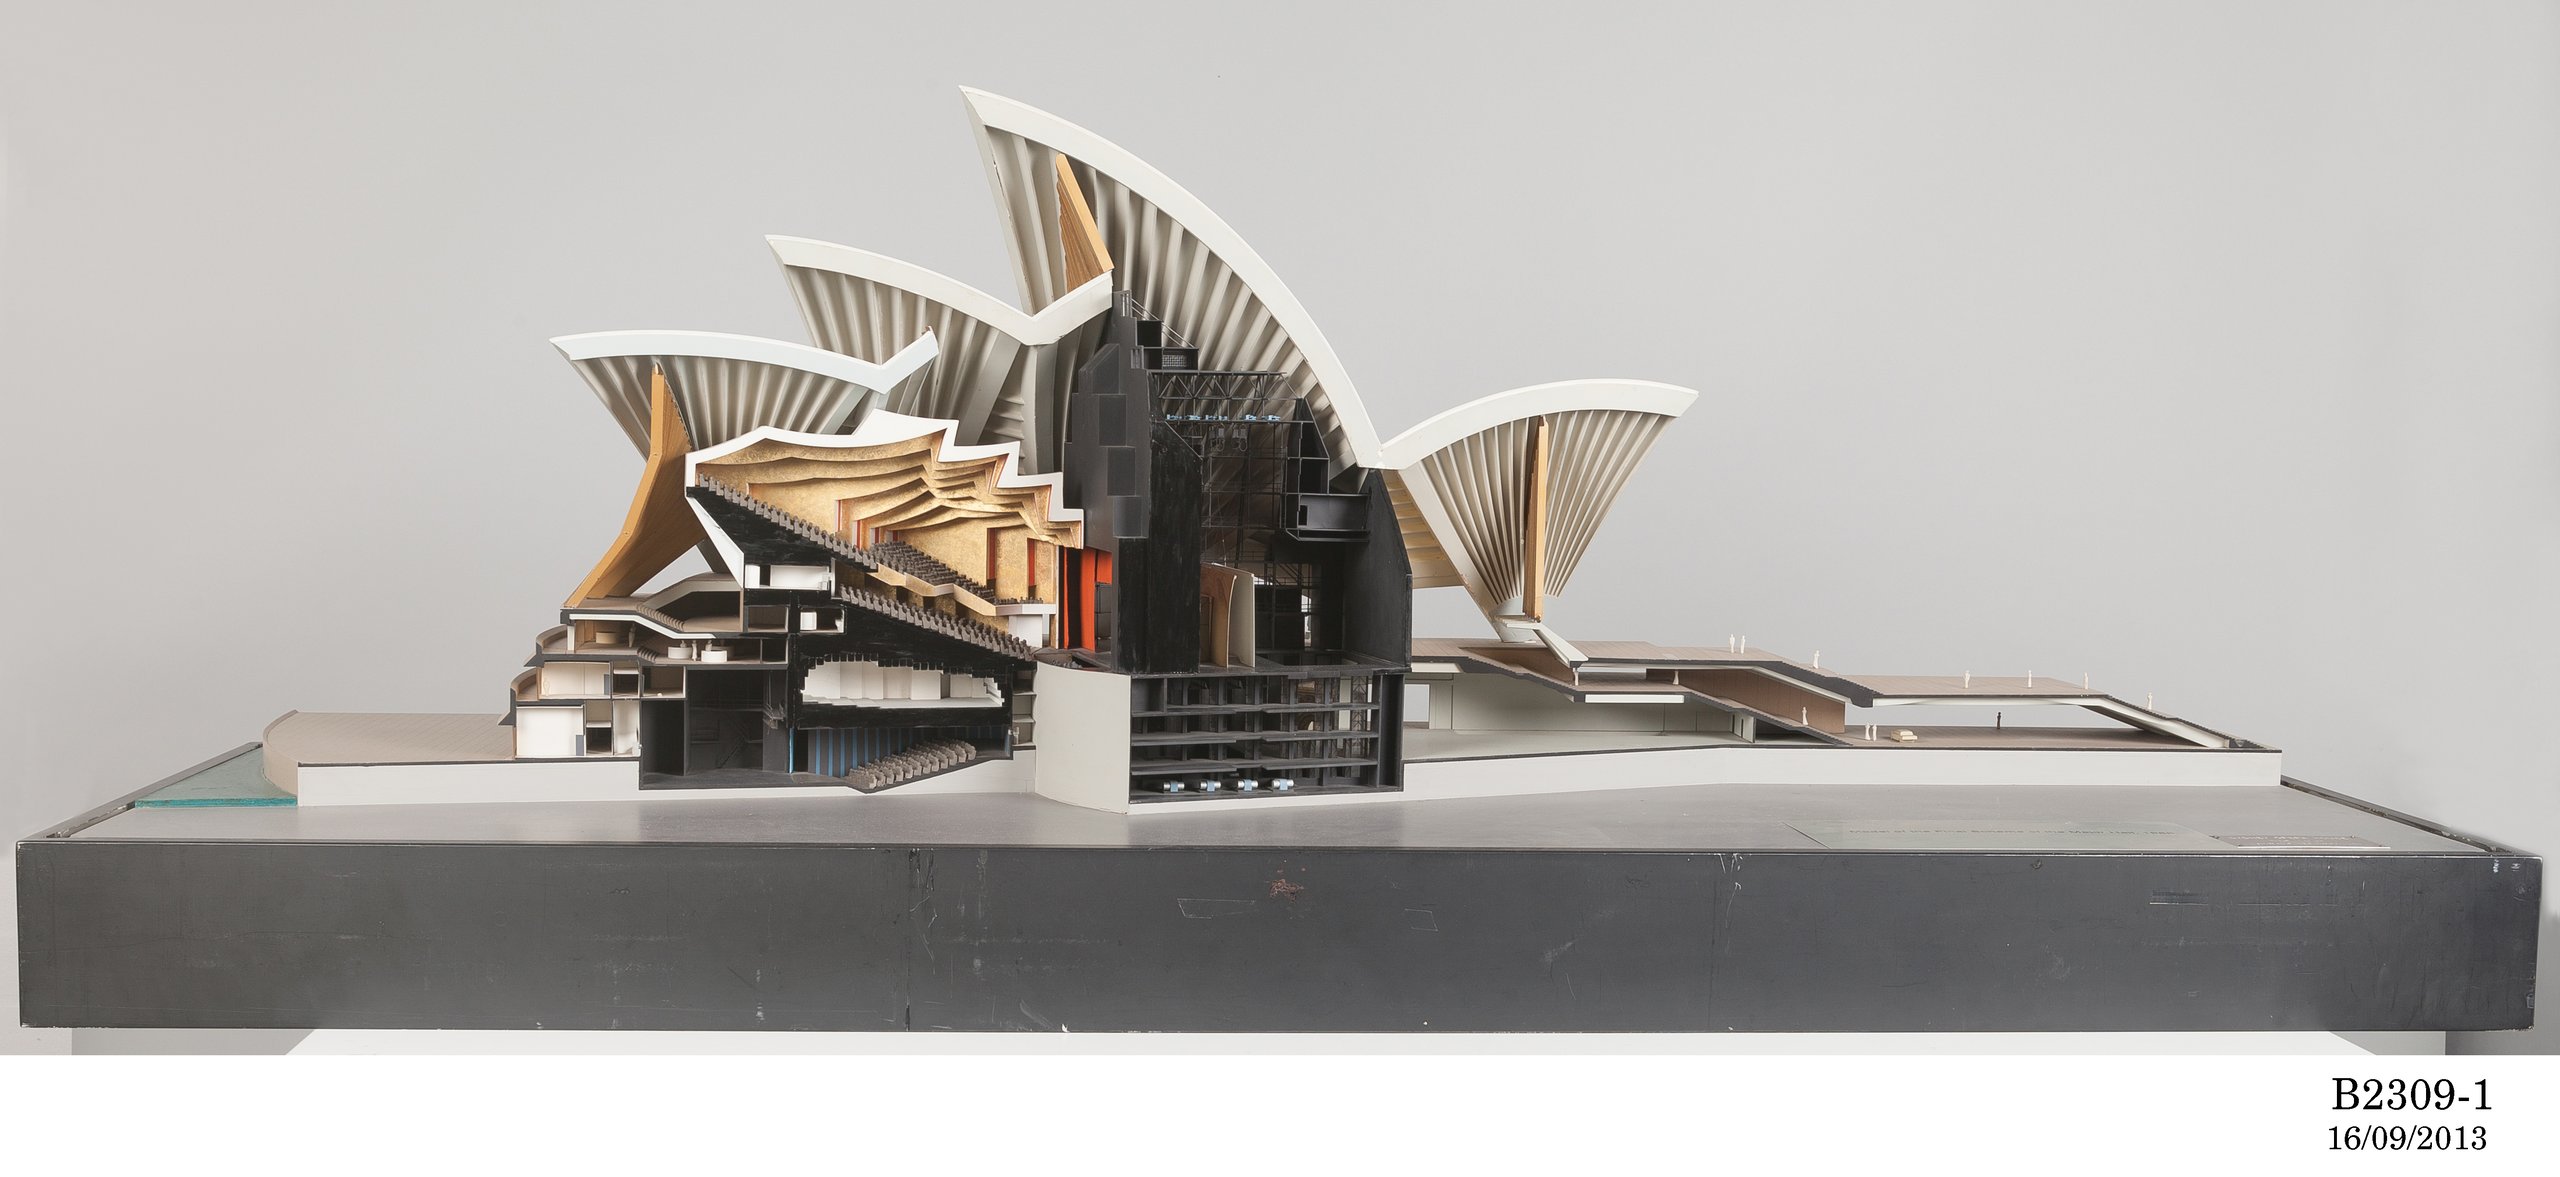 Cross-sectional architectural model of Sydney Opera House by Jørn Utzon